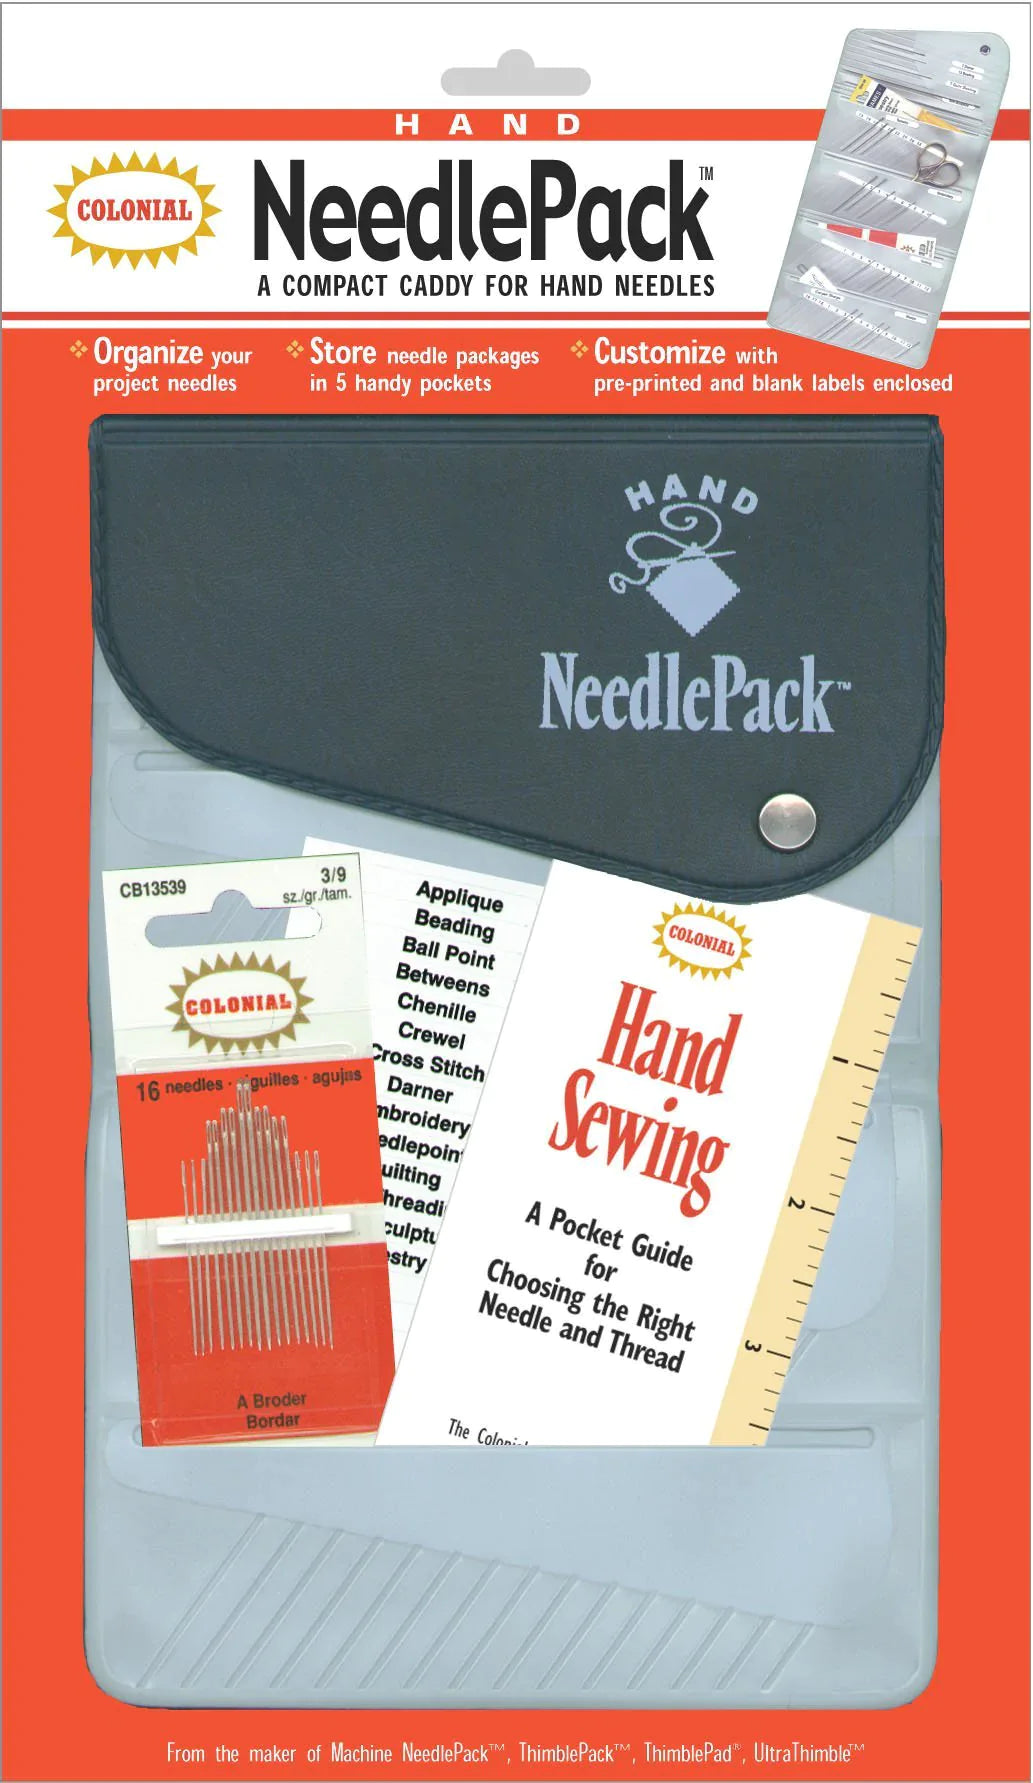 CN - Colonial Needle -Hand Needle Pack I